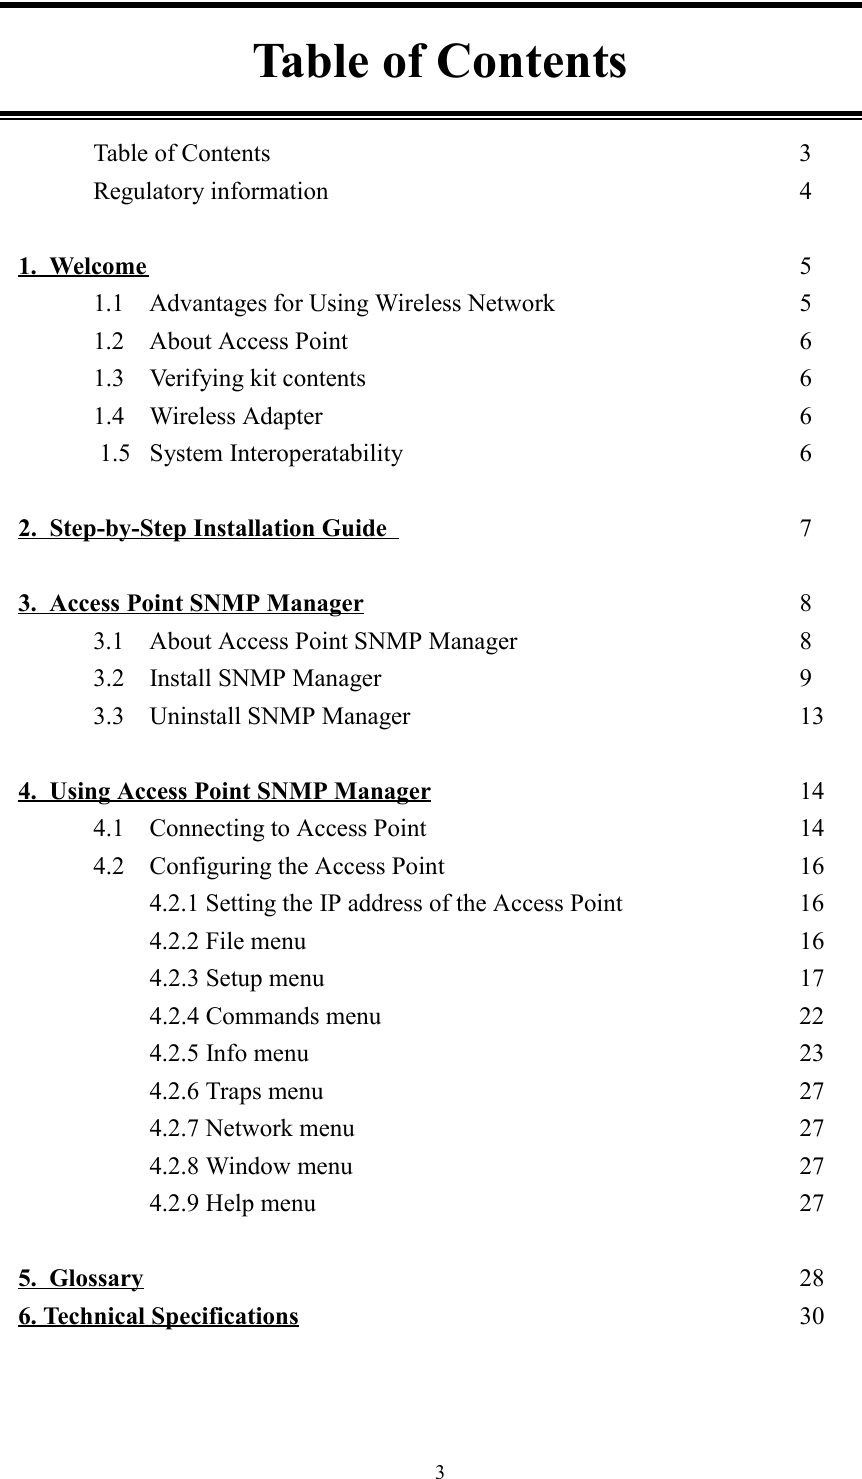 3Table of ContentsTable of Contents 3Regulatory information 41.  Welcome 51.1 Advantages for Using Wireless Network 51.2 About Access Point 61.3 Verifying kit contents 61.4 Wireless Adapter 61.5 System Interoperatability 62.  Step-by-Step Installation Guide  73.  Access Point SNMP Manager 83.1 About Access Point SNMP Manager 83.2 Install SNMP Manager 93.3 Uninstall SNMP Manager 134.  Using Access Point SNMP Manager 144.1 Connecting to Access Point 144.2 Configuring the Access Point  164.2.1 Setting the IP address of the Access Point 164.2.2 File menu 164.2.3 Setup menu 174.2.4 Commands menu 224.2.5 Info menu 234.2.6 Traps menu 274.2.7 Network menu 274.2.8 Window menu 274.2.9 Help menu 275.  Glossary 286. Technical Specifications 30